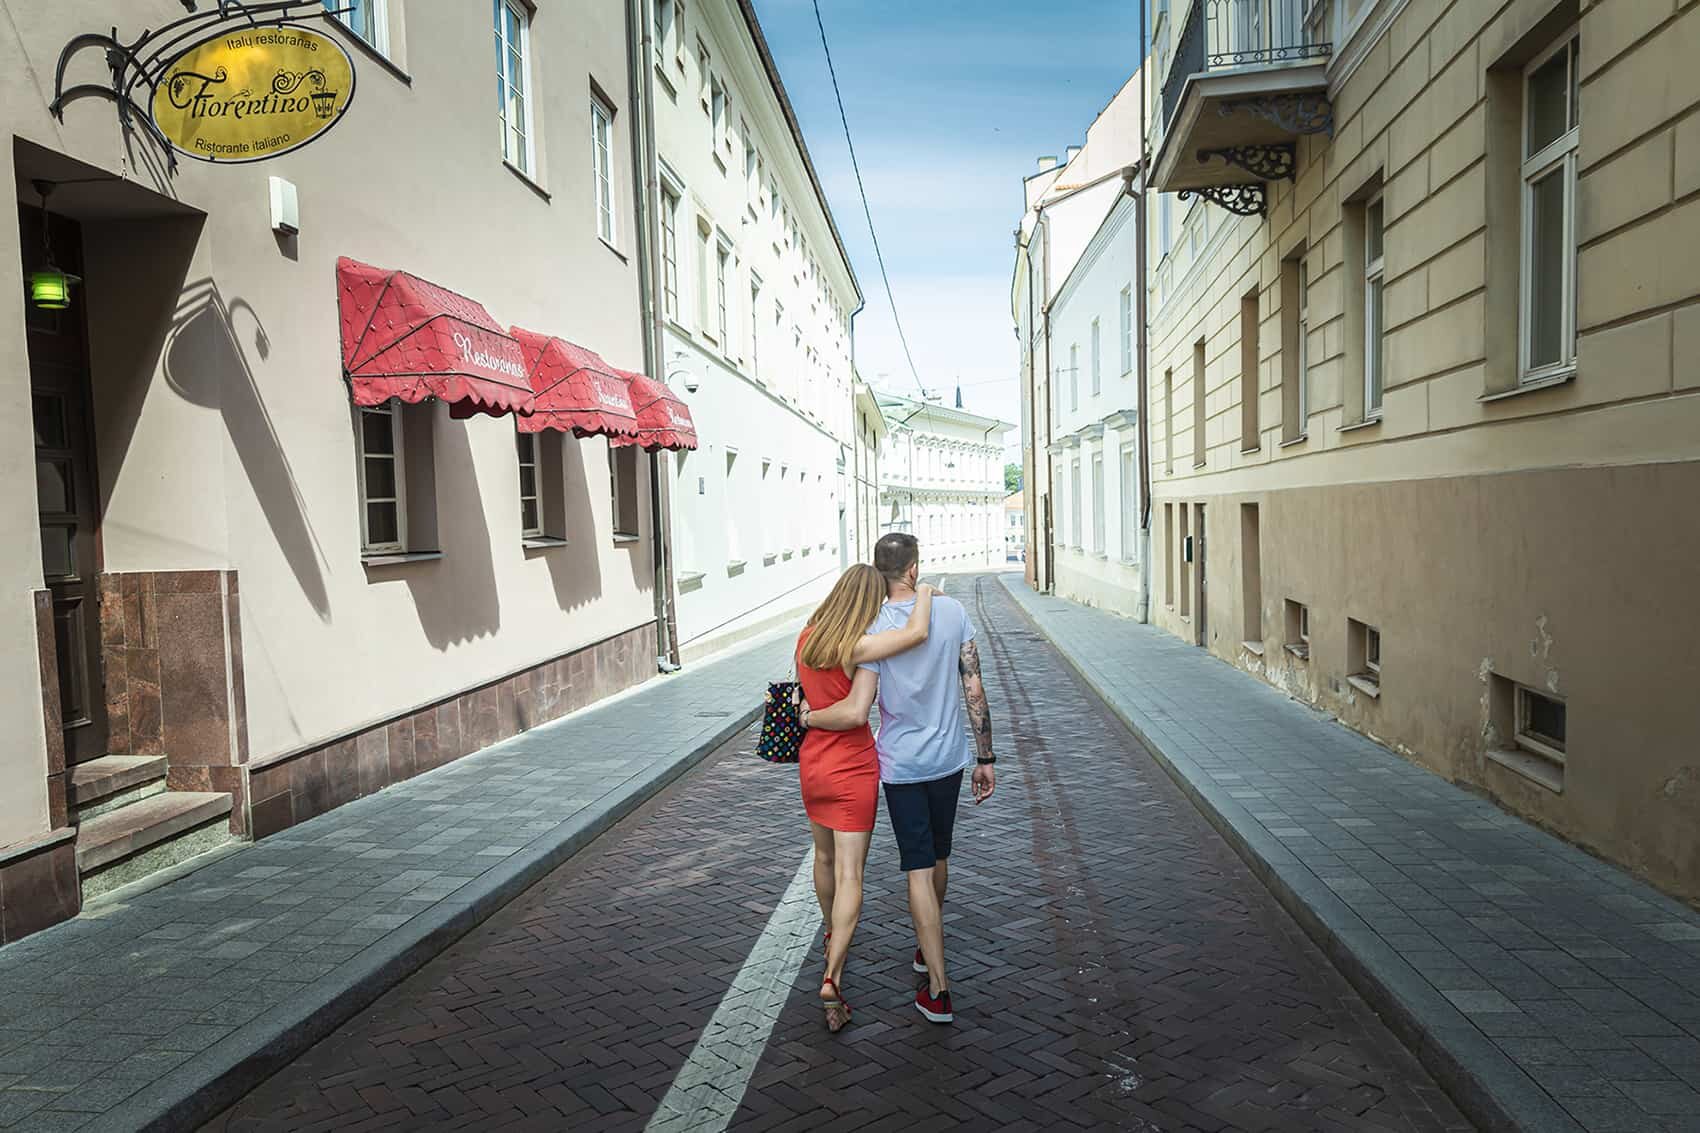 Explore Vilnius with your beloved one